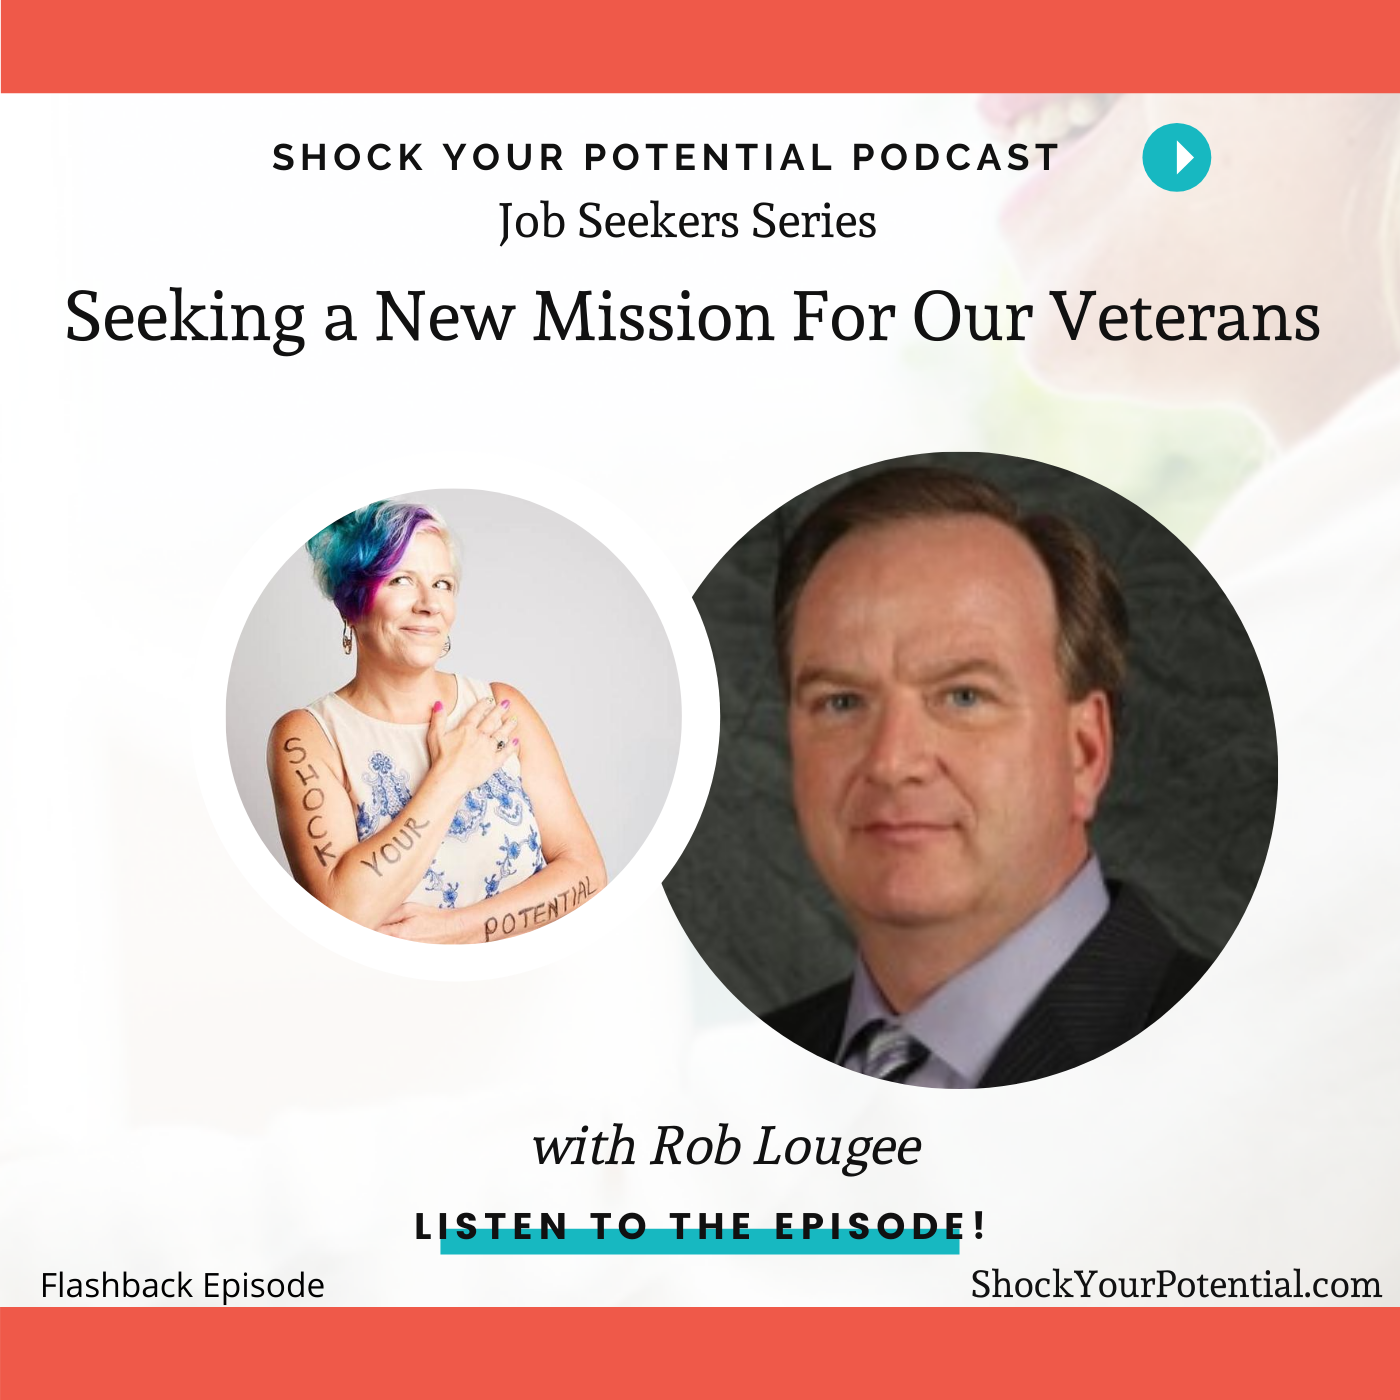 Seeking a New Mission For Our Veterans – Rob Lougee